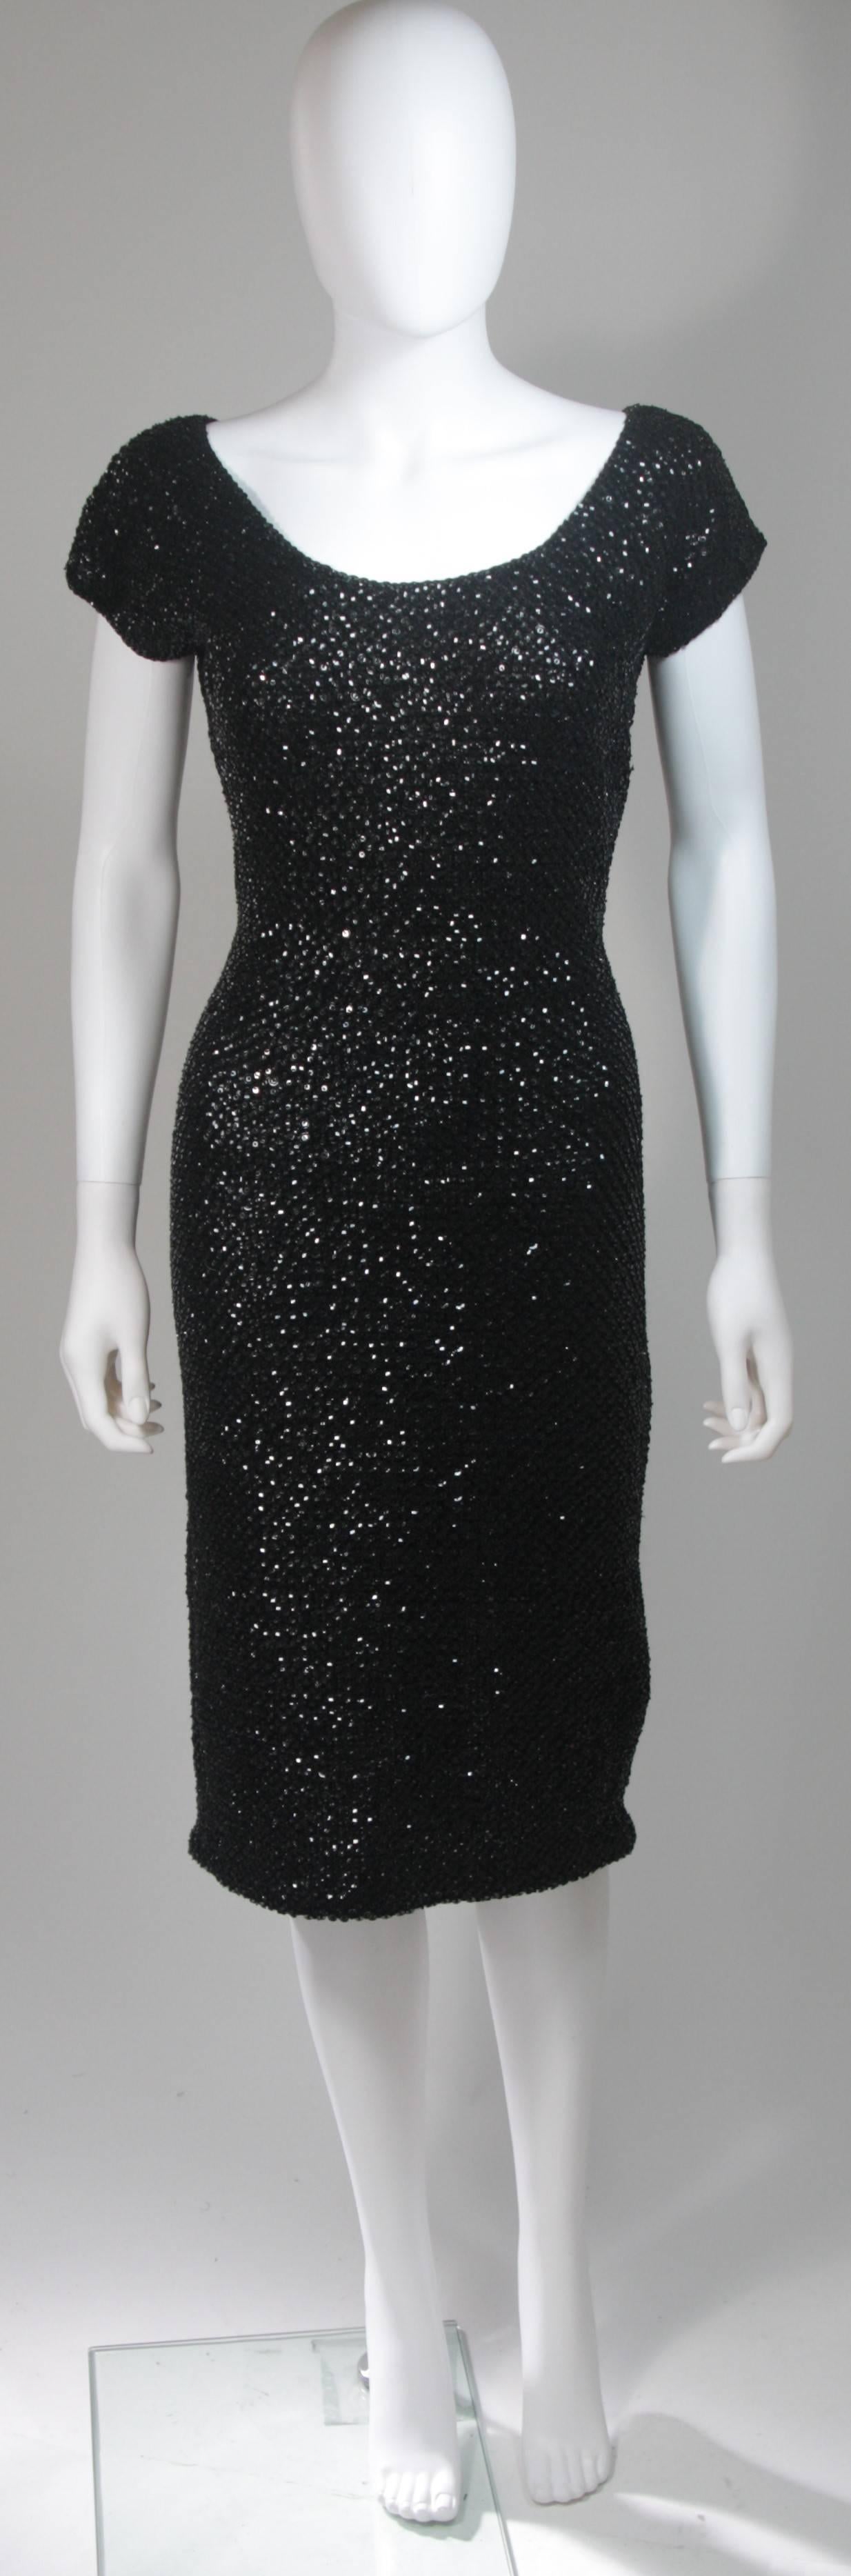 This Gene Shelly cocktail dress is fashioned from a black knit wool and features sequin embellishing throughout. The 3/4 length is complimented with a perfectly proportioned cap sleeve. There is a zipper closure. In excellent condition. Made in Hong